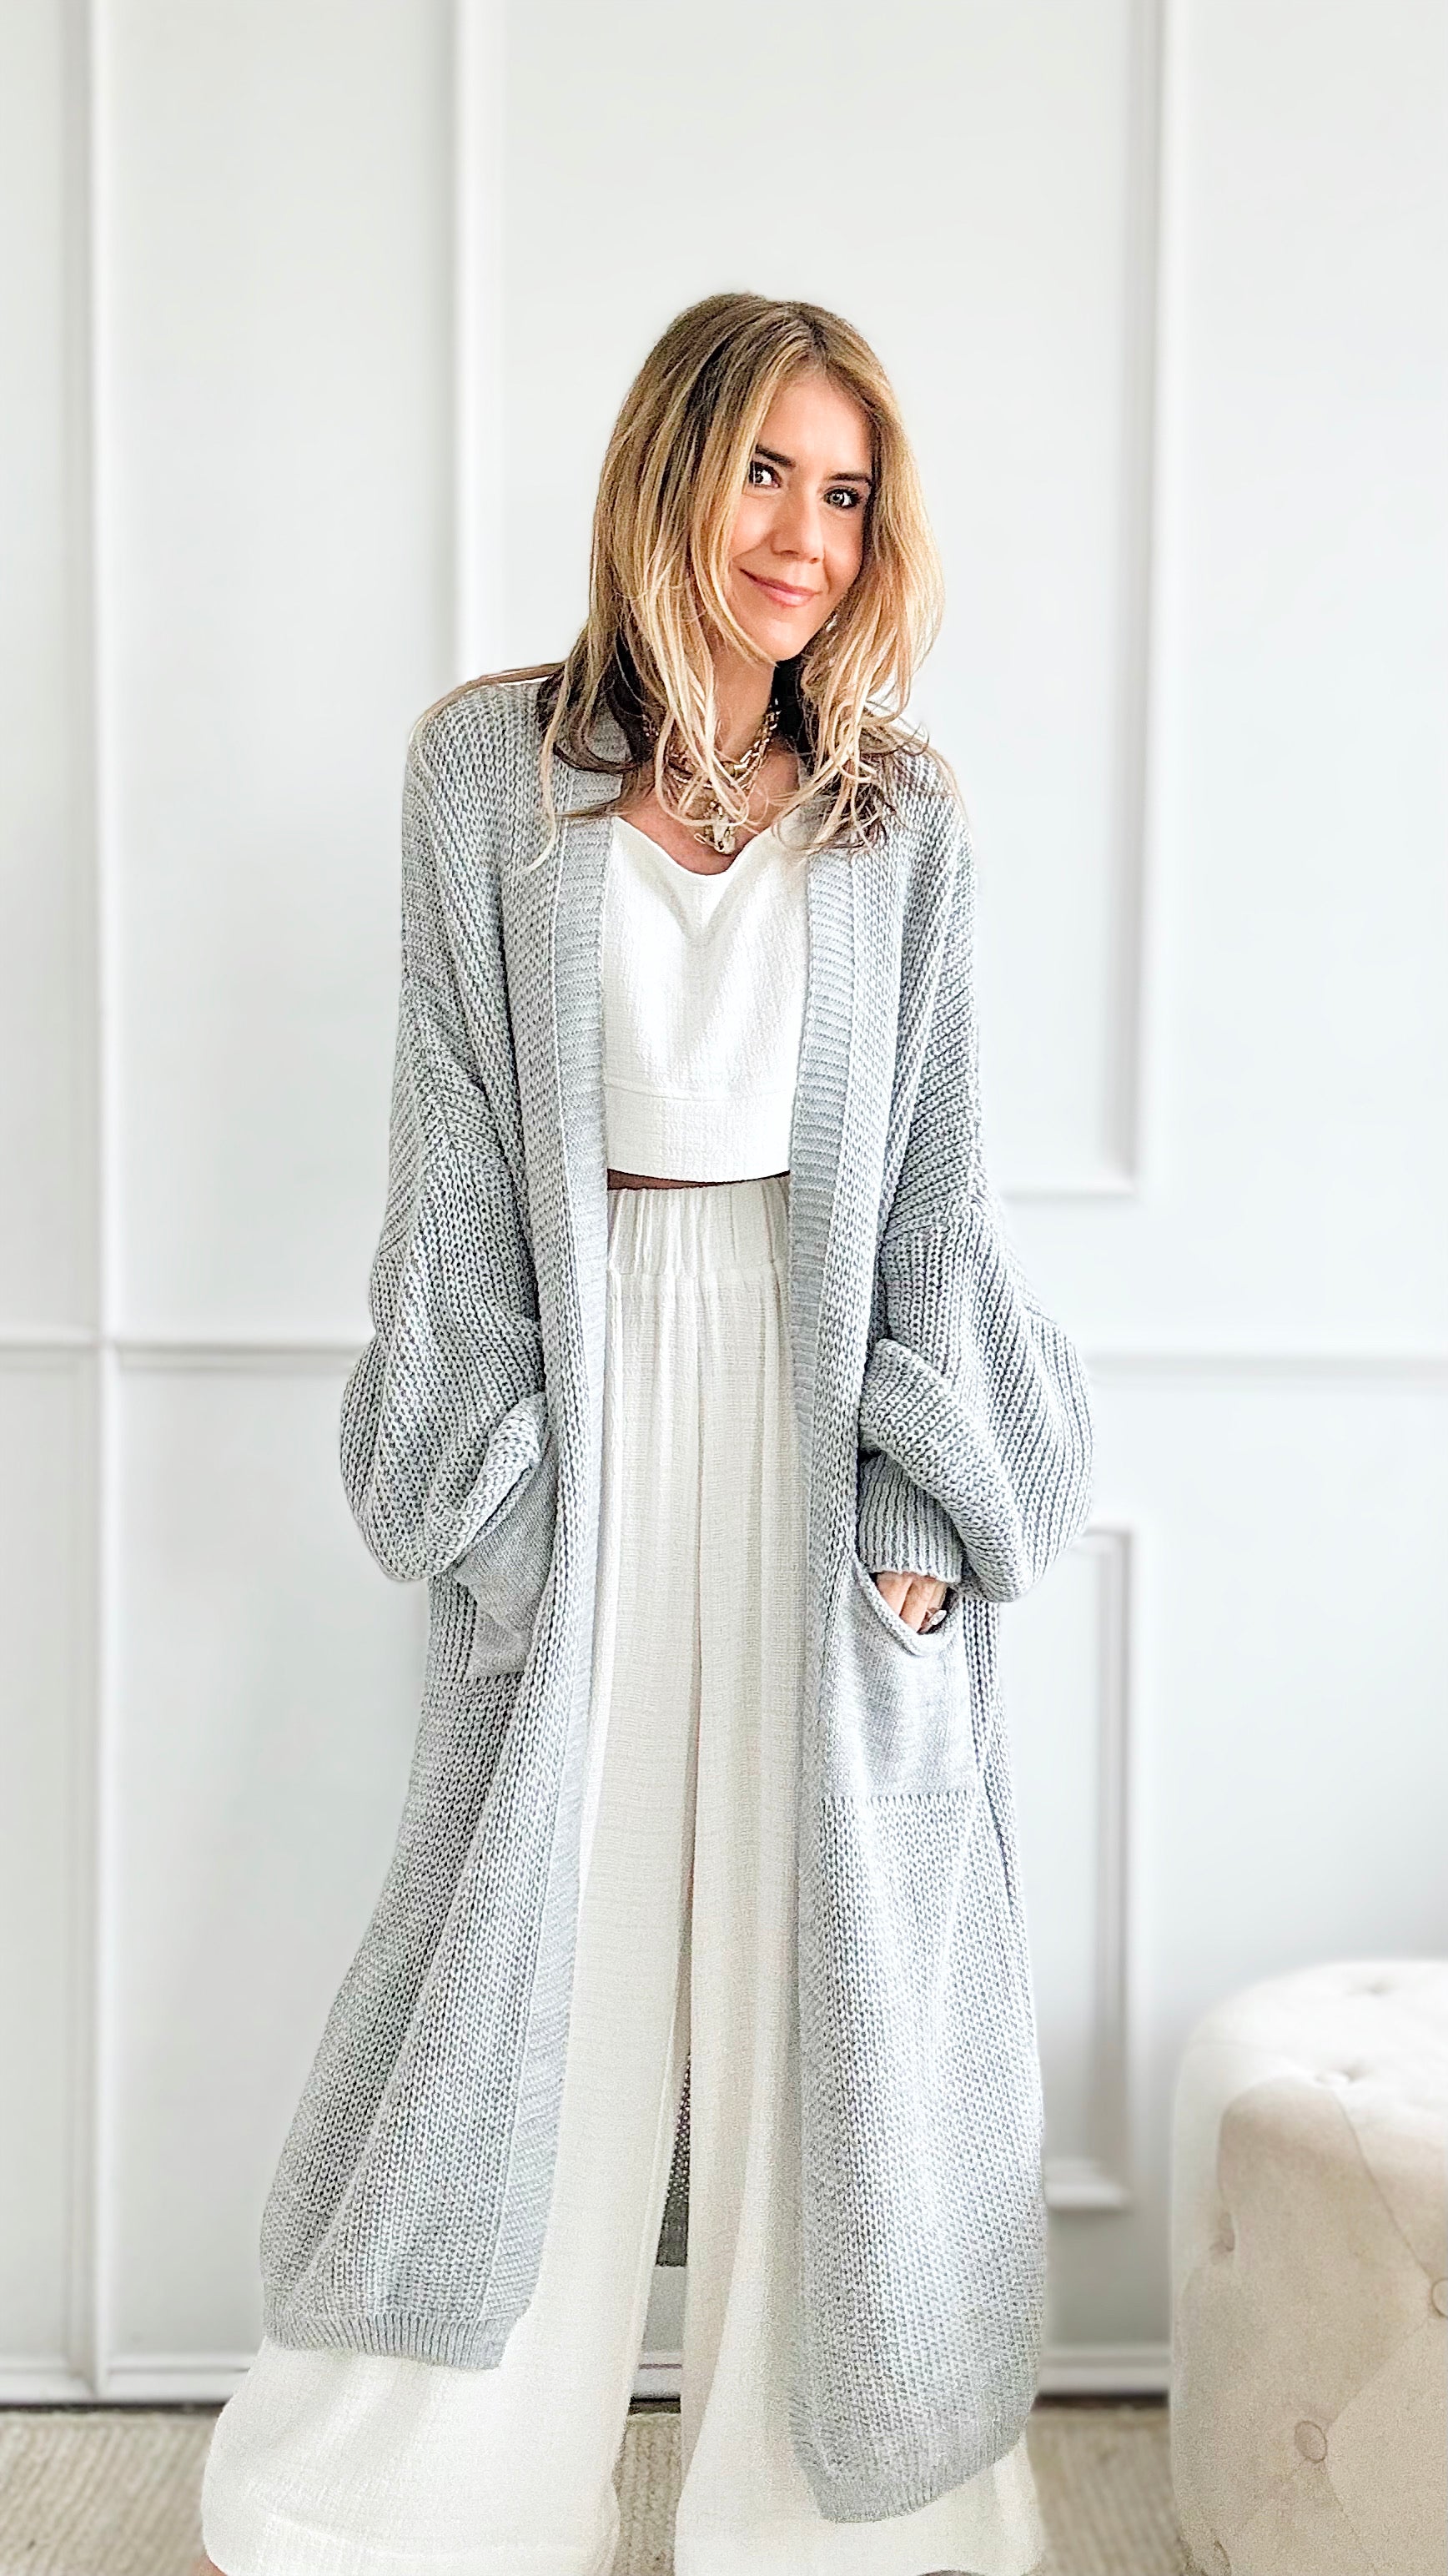 Sugar High Long Italian Cardigan - Lt Grey-150 Cardigans/Layers-Germany-Coastal Bloom Boutique, find the trendiest versions of the popular styles and looks Located in Indialantic, FL